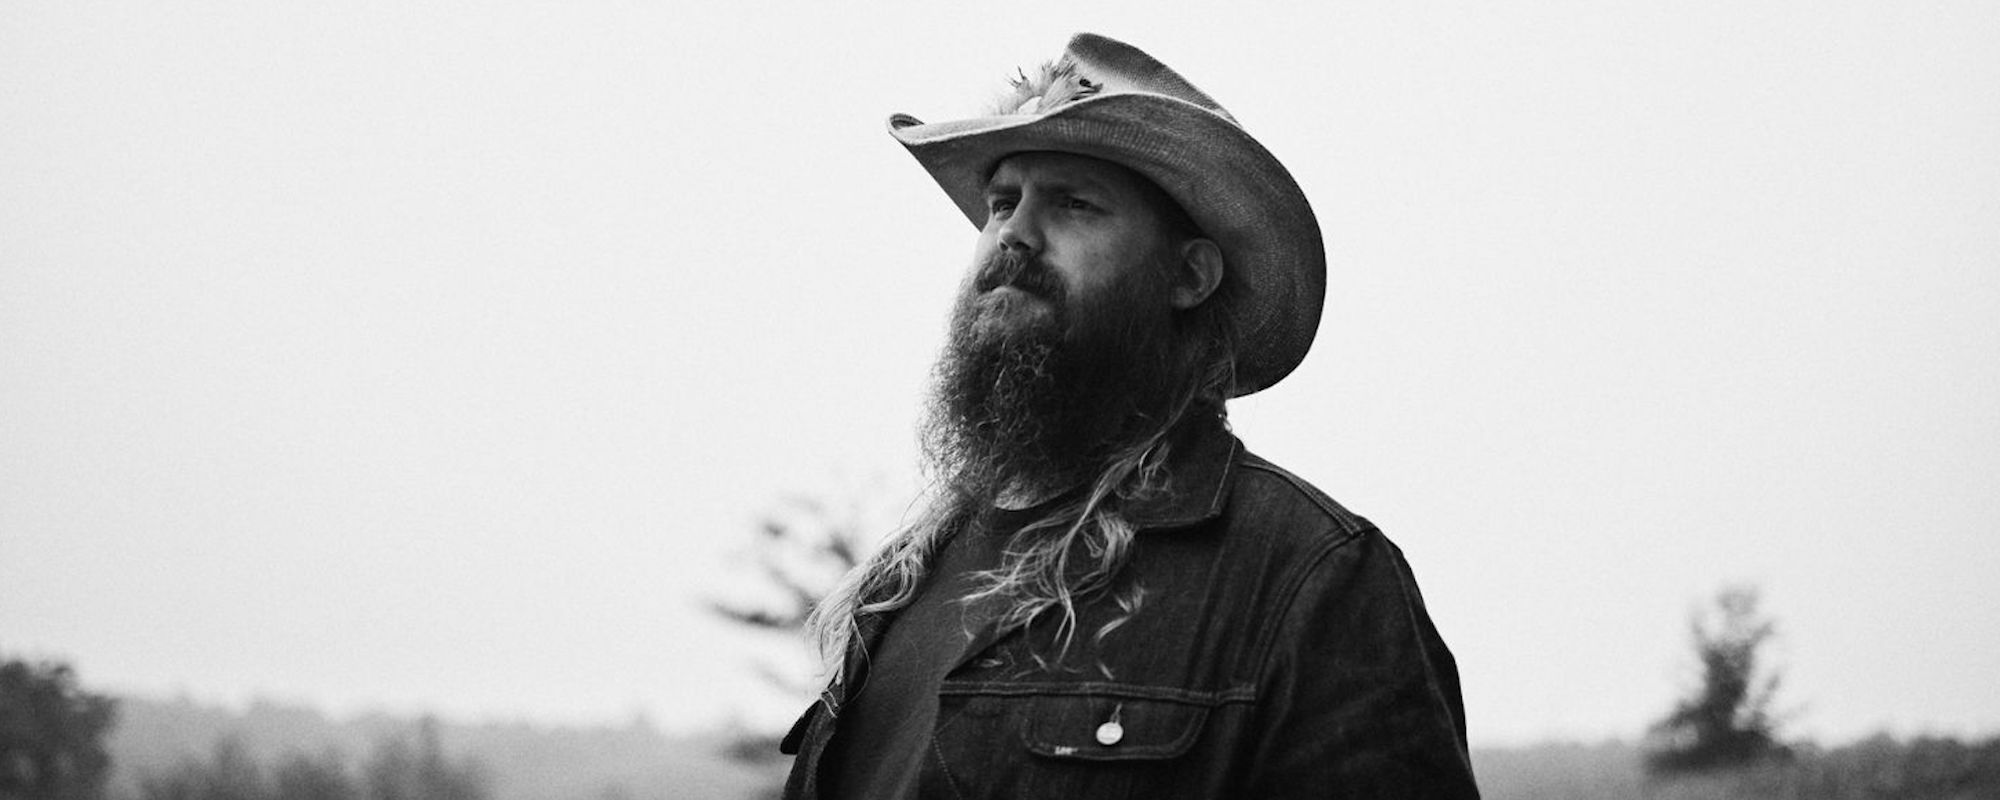 Chris Stapleton Talks Writing a Hit Song and His “Voice of Reason”